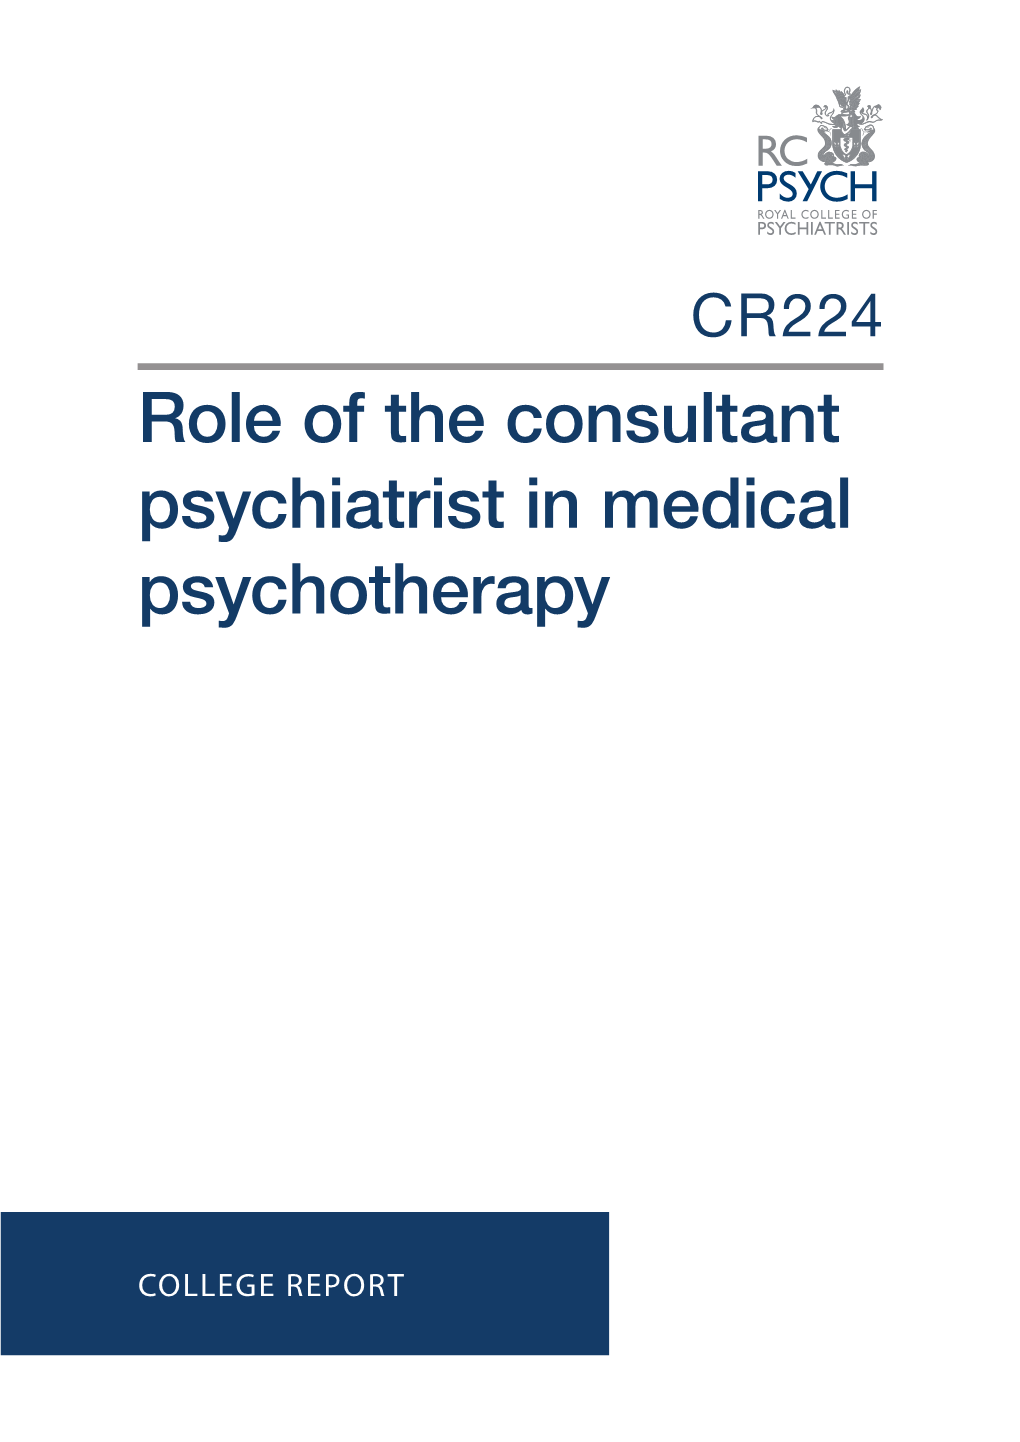 Role of the Consultant Psychiatrist in Medical Psychotherapy